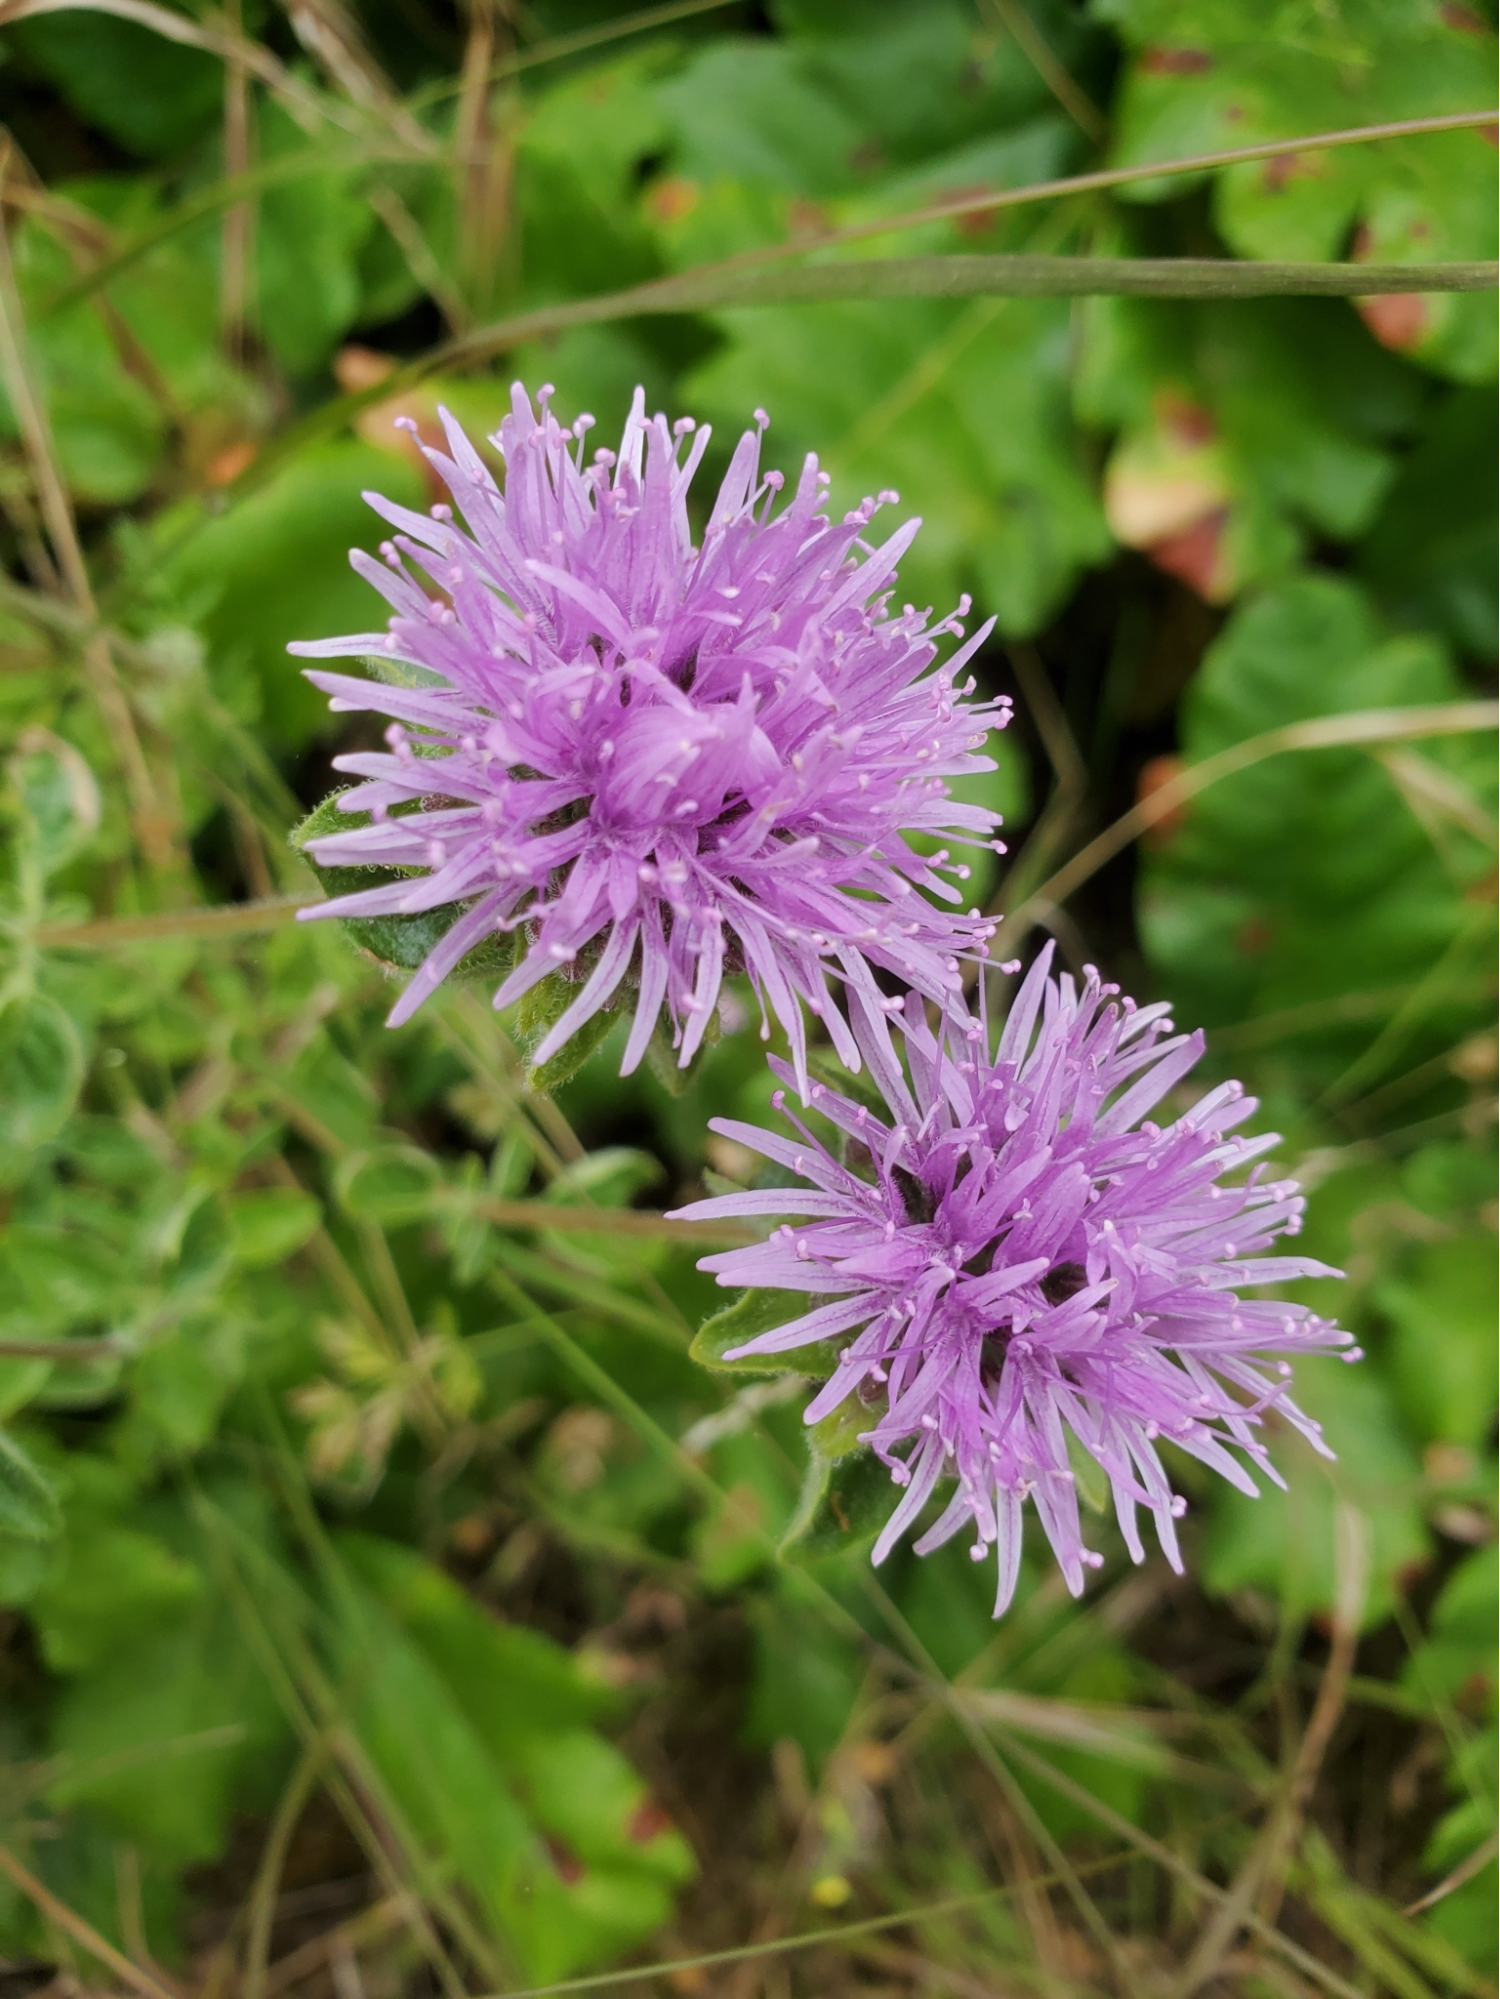 A photo of Coyote Mint, Monardella villosa showing off two of its lilac colored, firework shaped inflorescences.